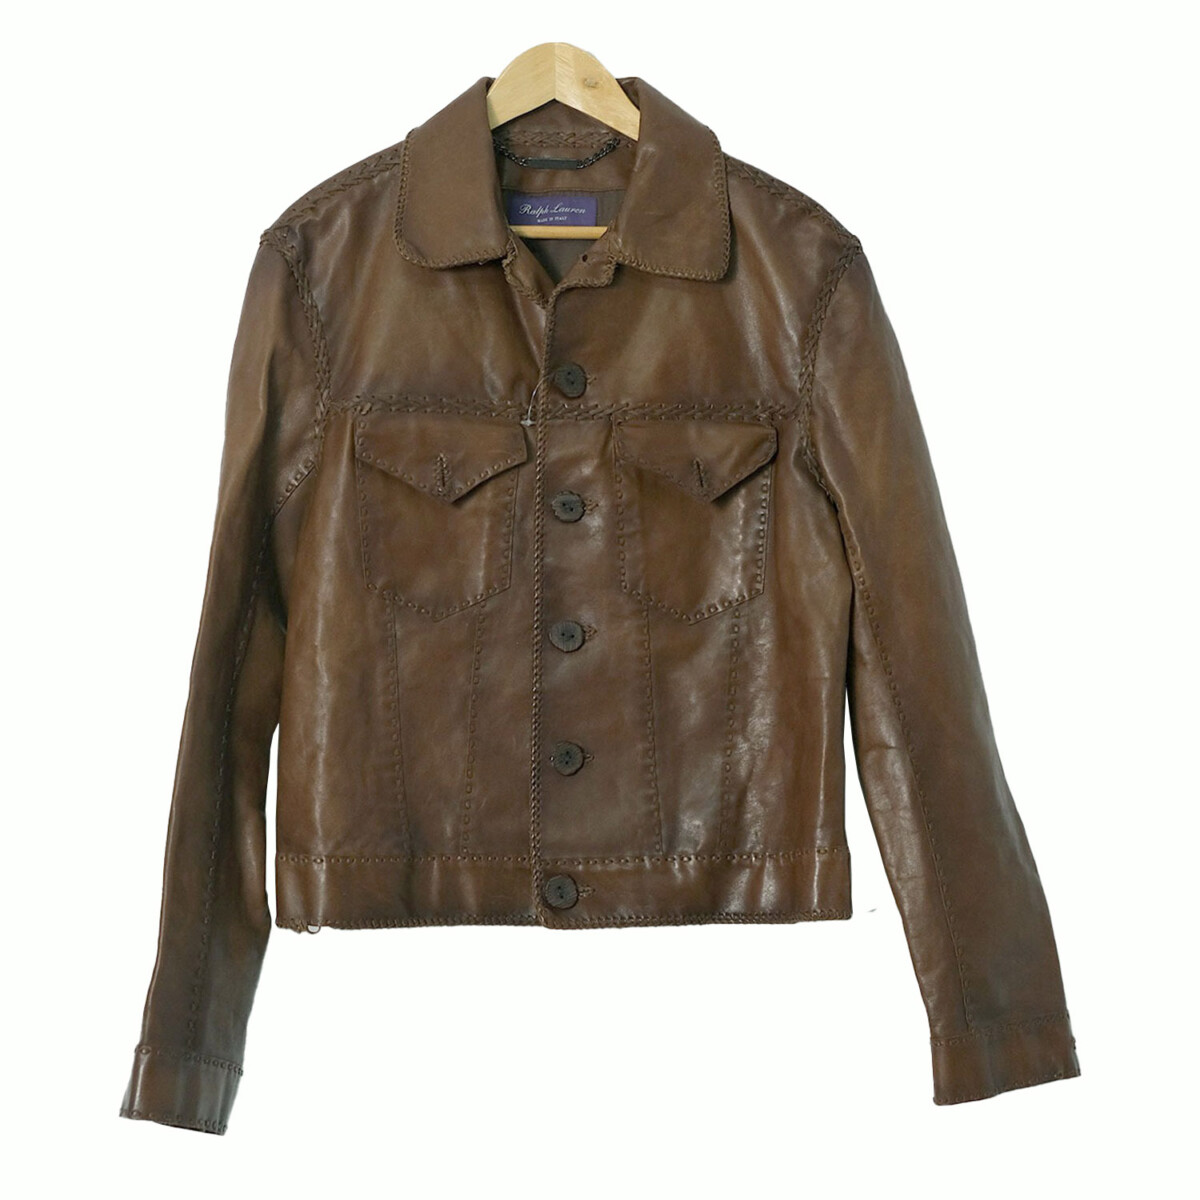 Ralph lauren leather jacket 3XB - clothing & accessories - by